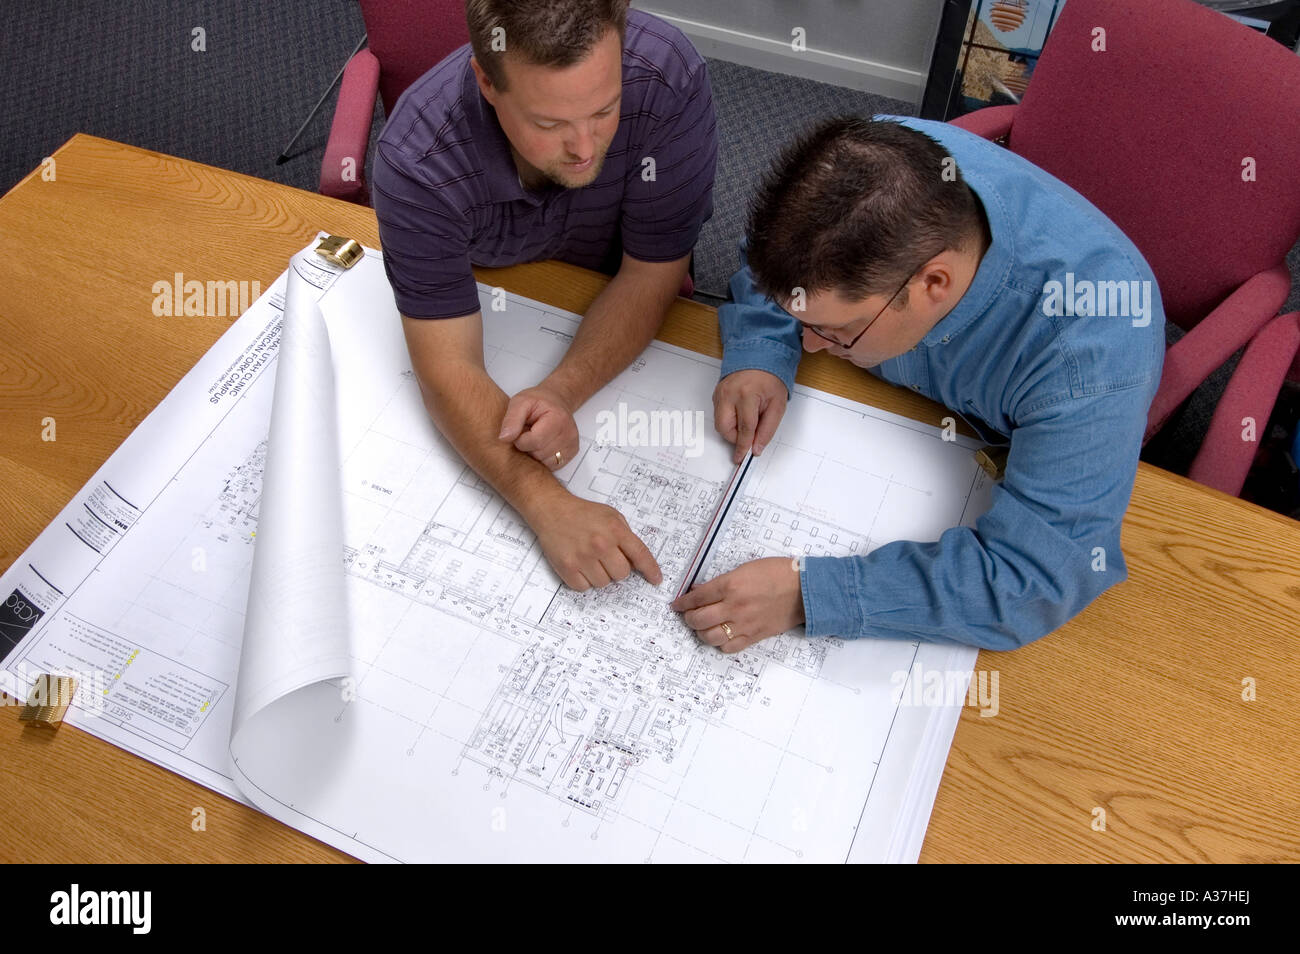 Shot from above as two men review blueprints on a large wood desk Stock Photo